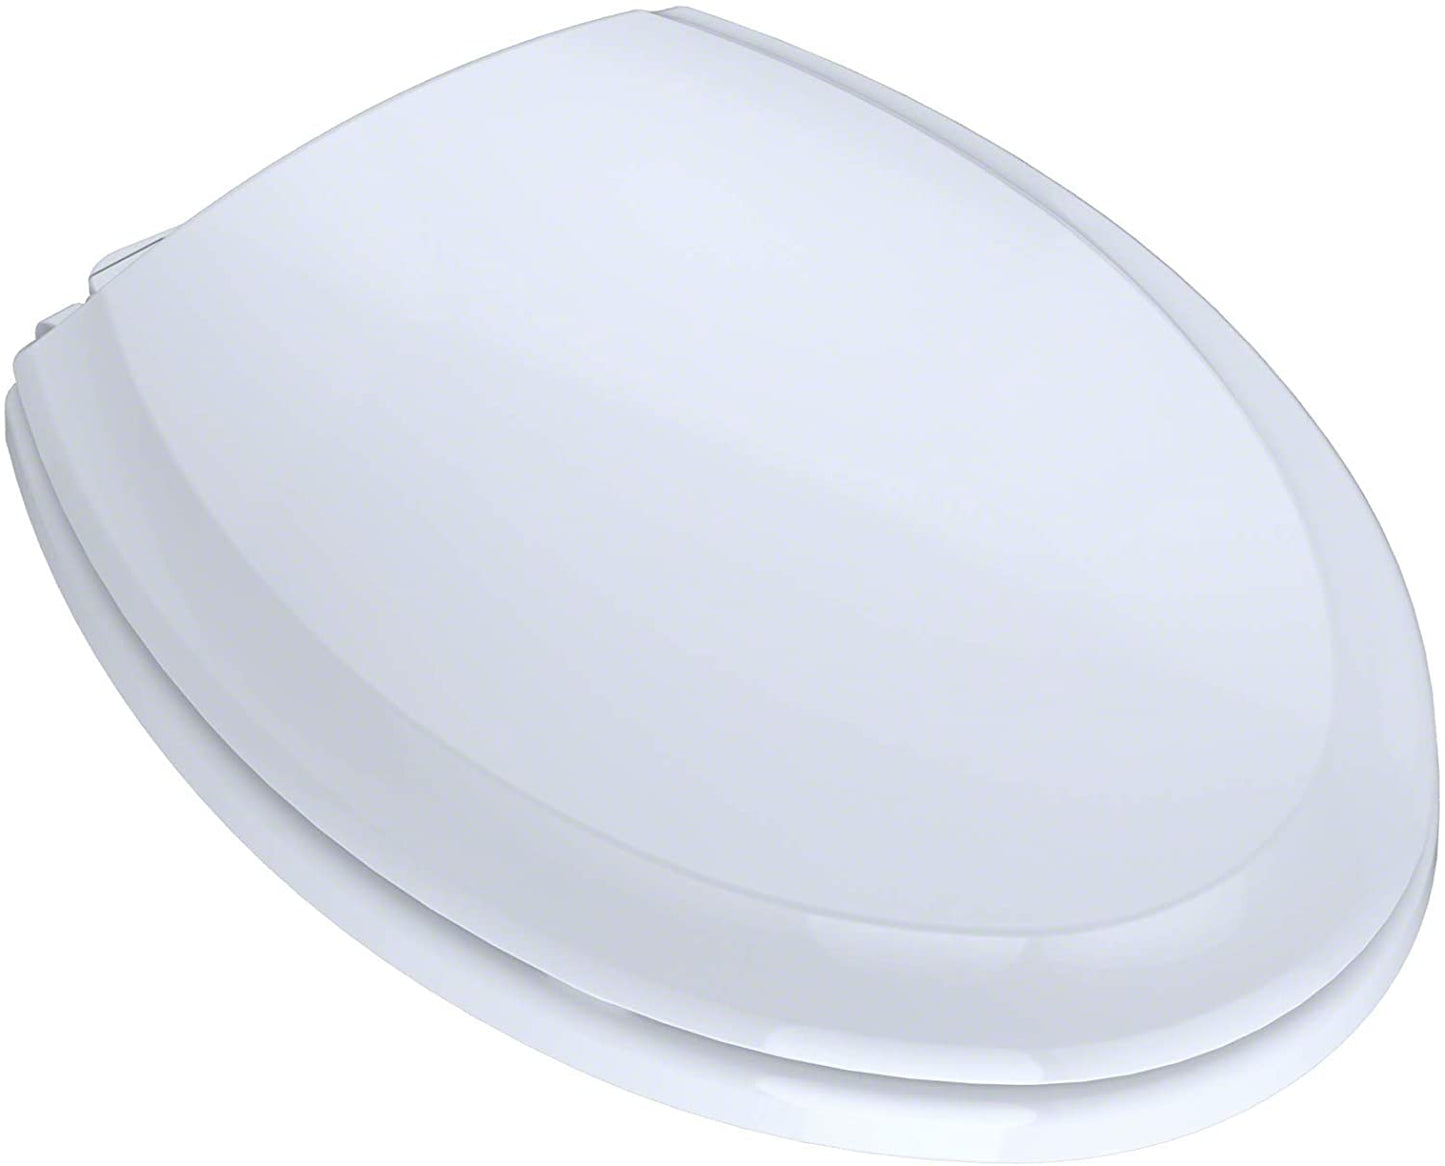 SS224#01 - Guinevere SoftClose Elongated Toilet Seat - Cotton White